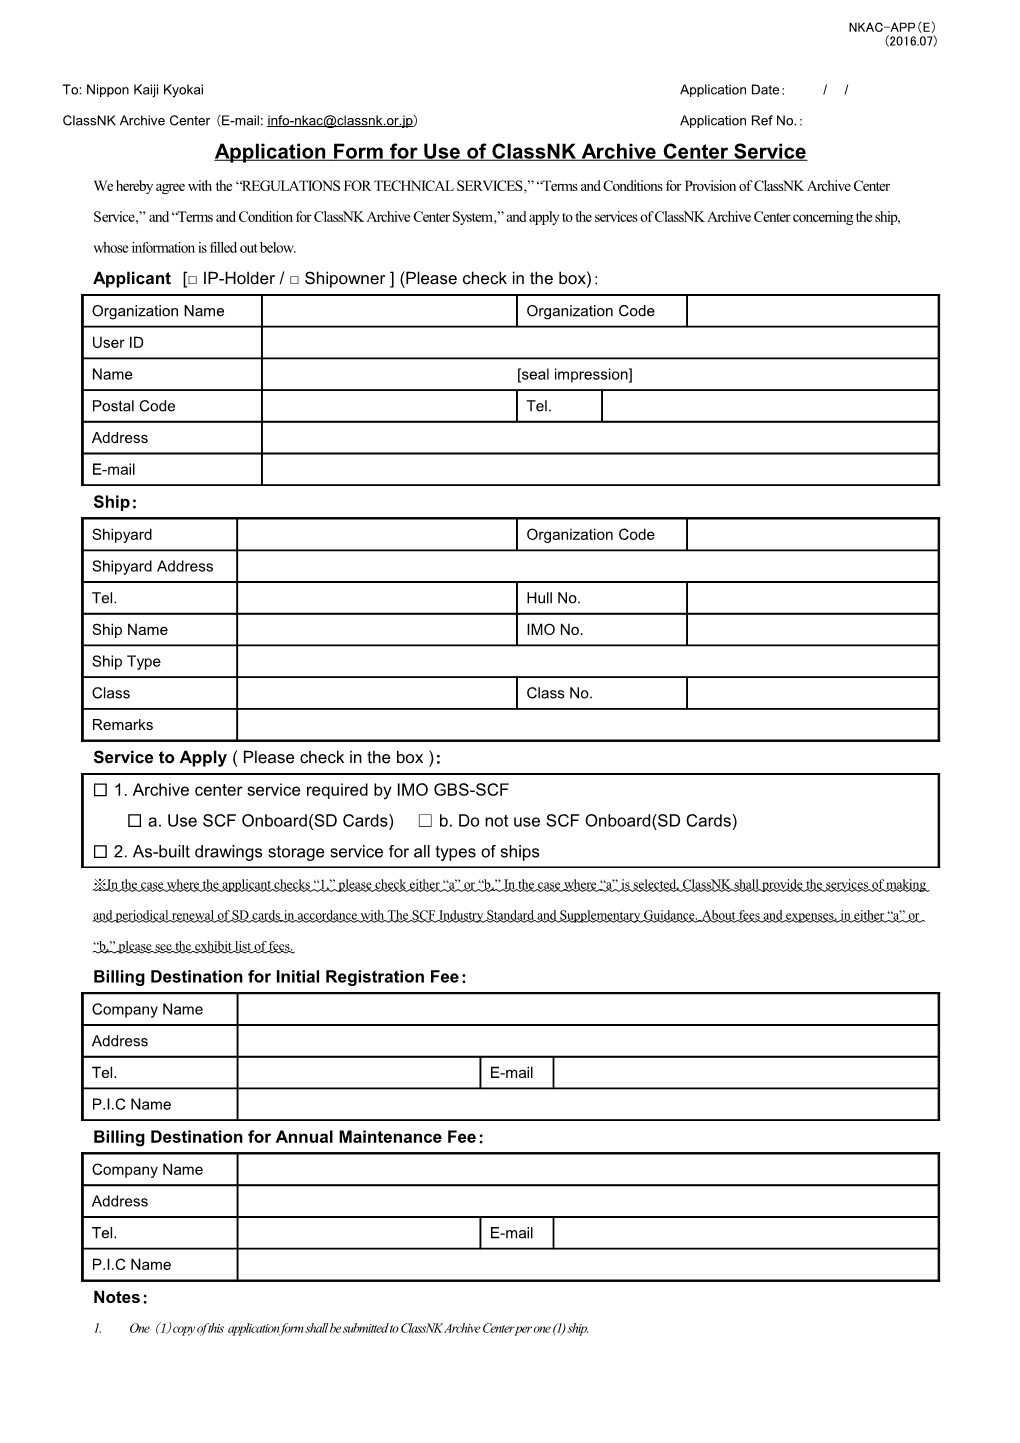 Application Form for Use of Classnk Archive Center Service